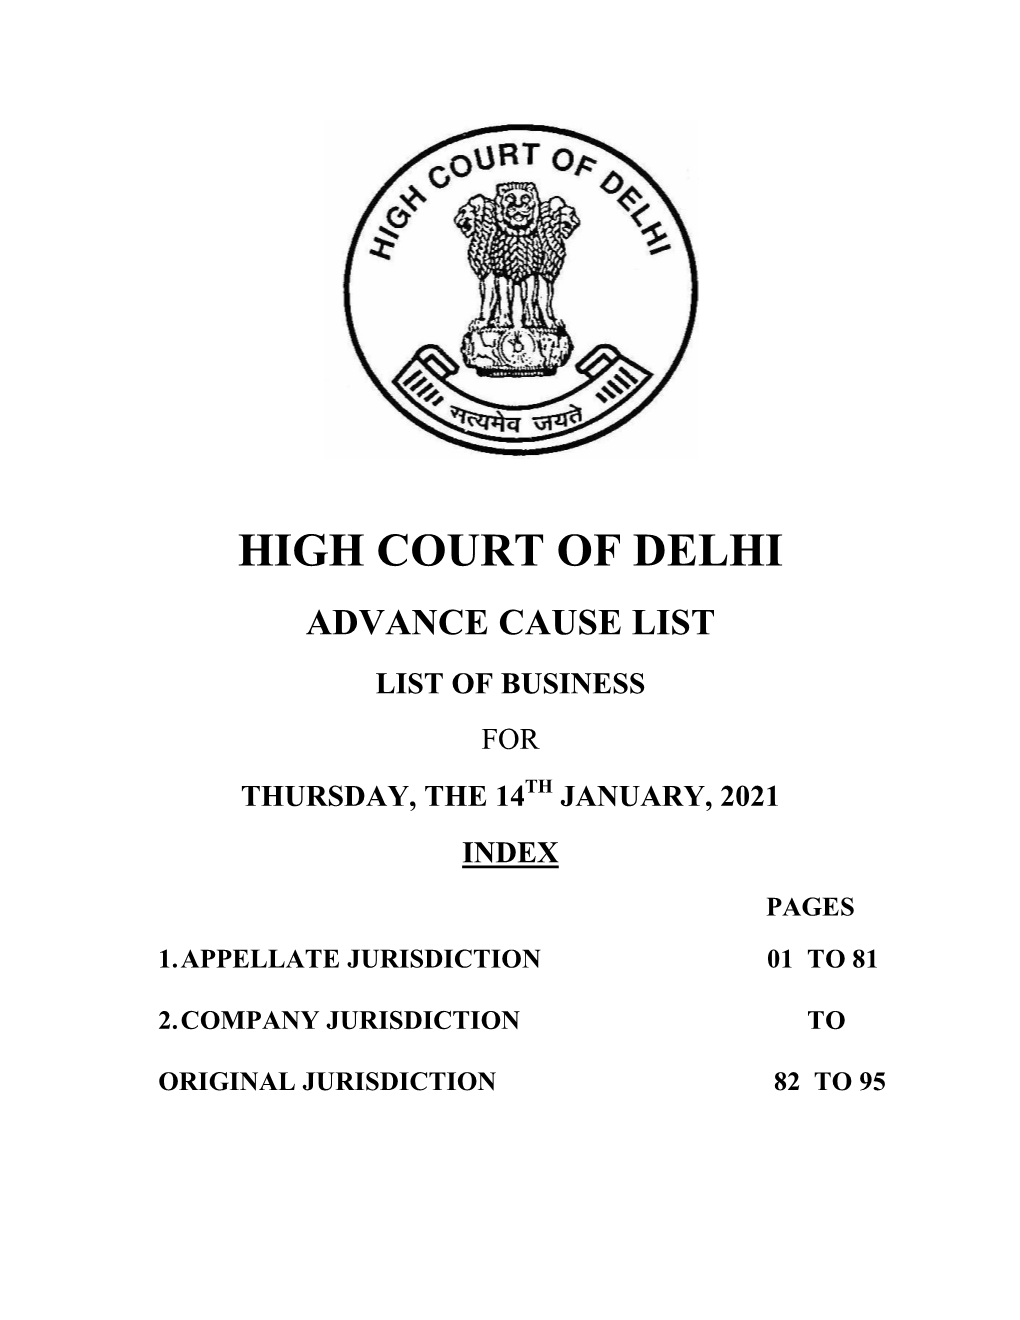 Advance Cause List List of Business for Thursday, the 14Th January, 2021 Index Pages